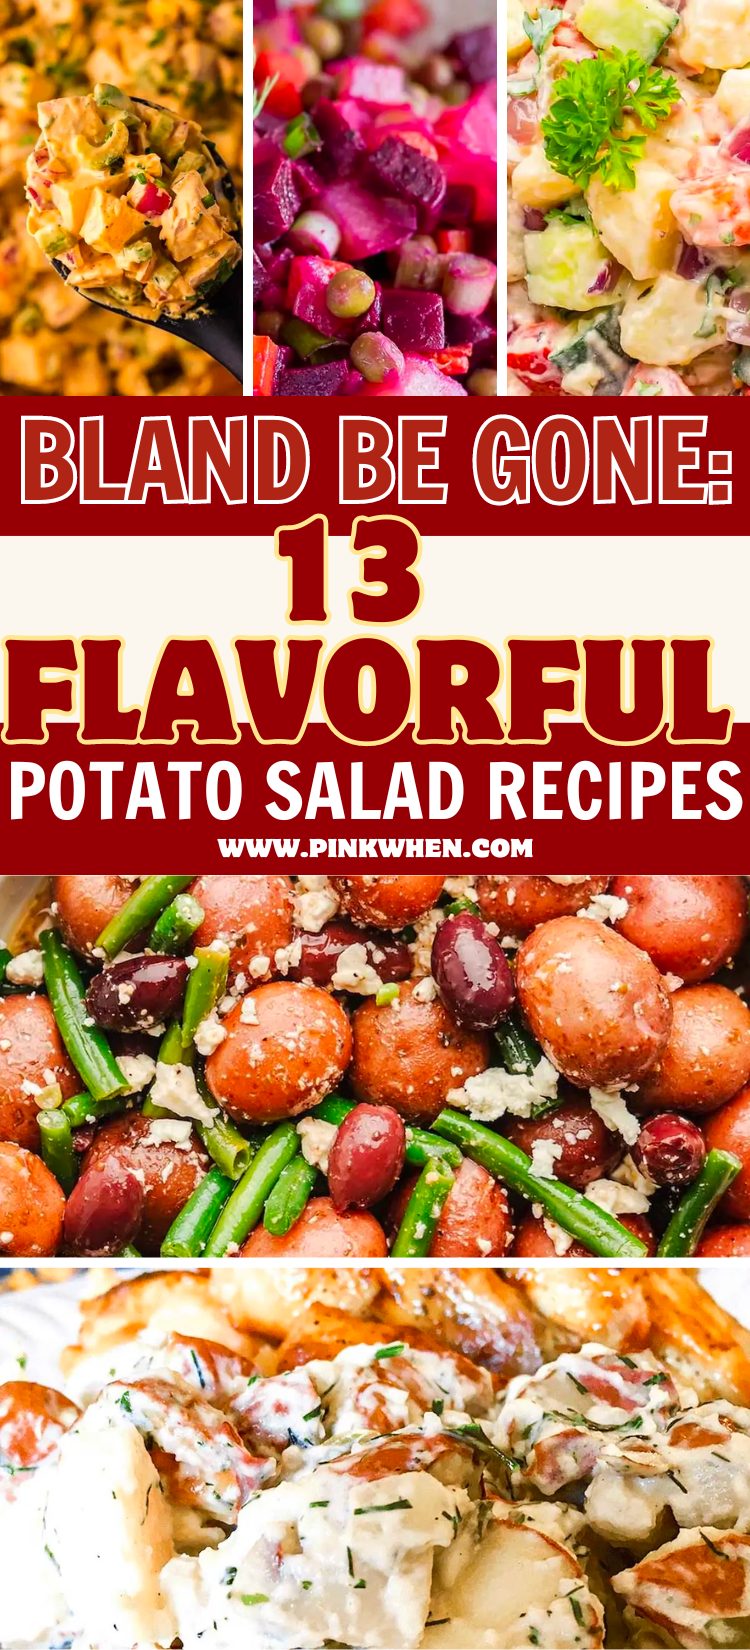 Bland Be Gone: 14 Flavorful Potato Salad Recipes